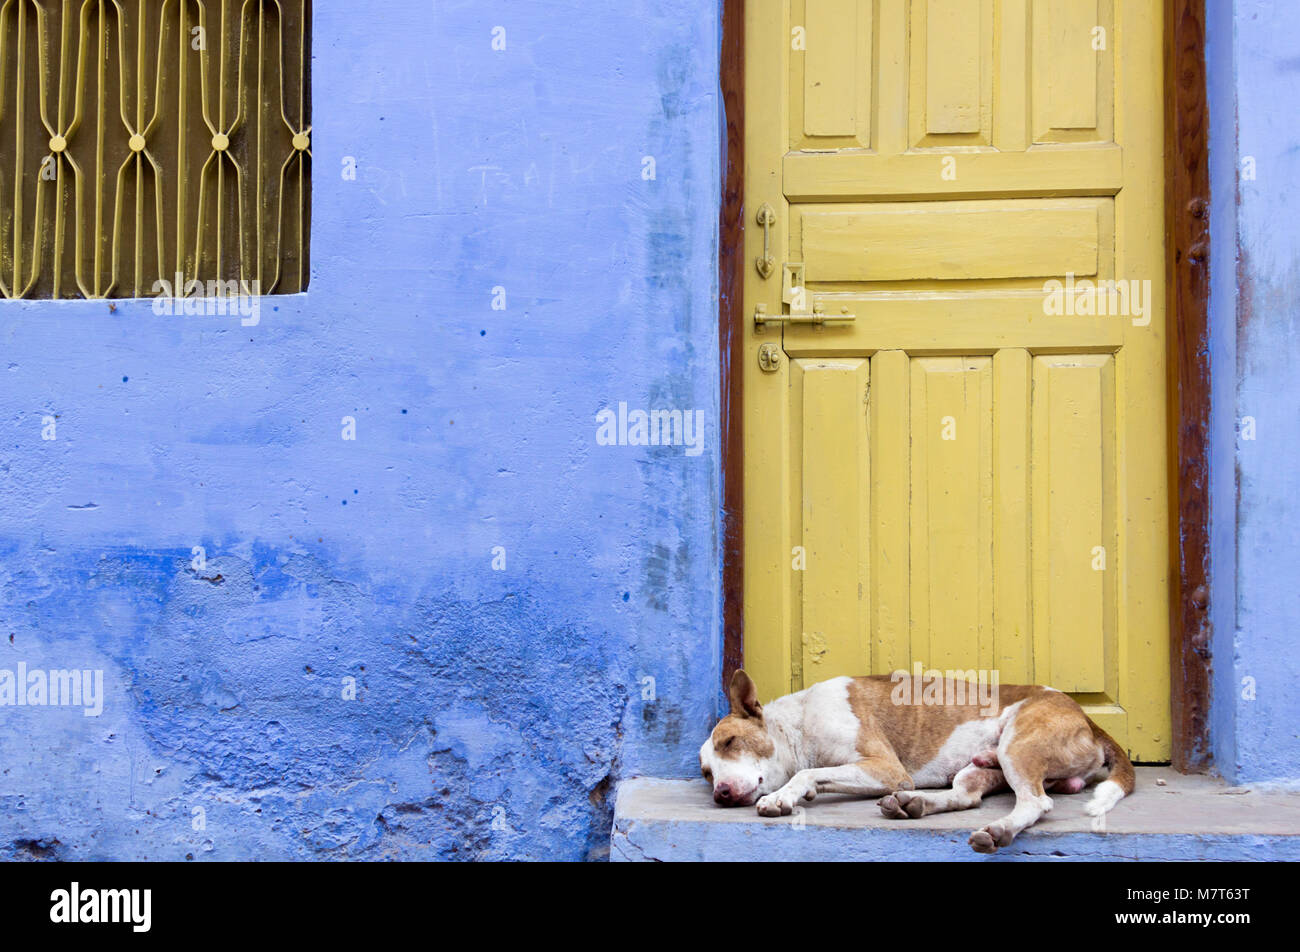 Solitary dog lies in front of a blue house with a yellow door, Bundi, Rajasthan, India. Stock Photo